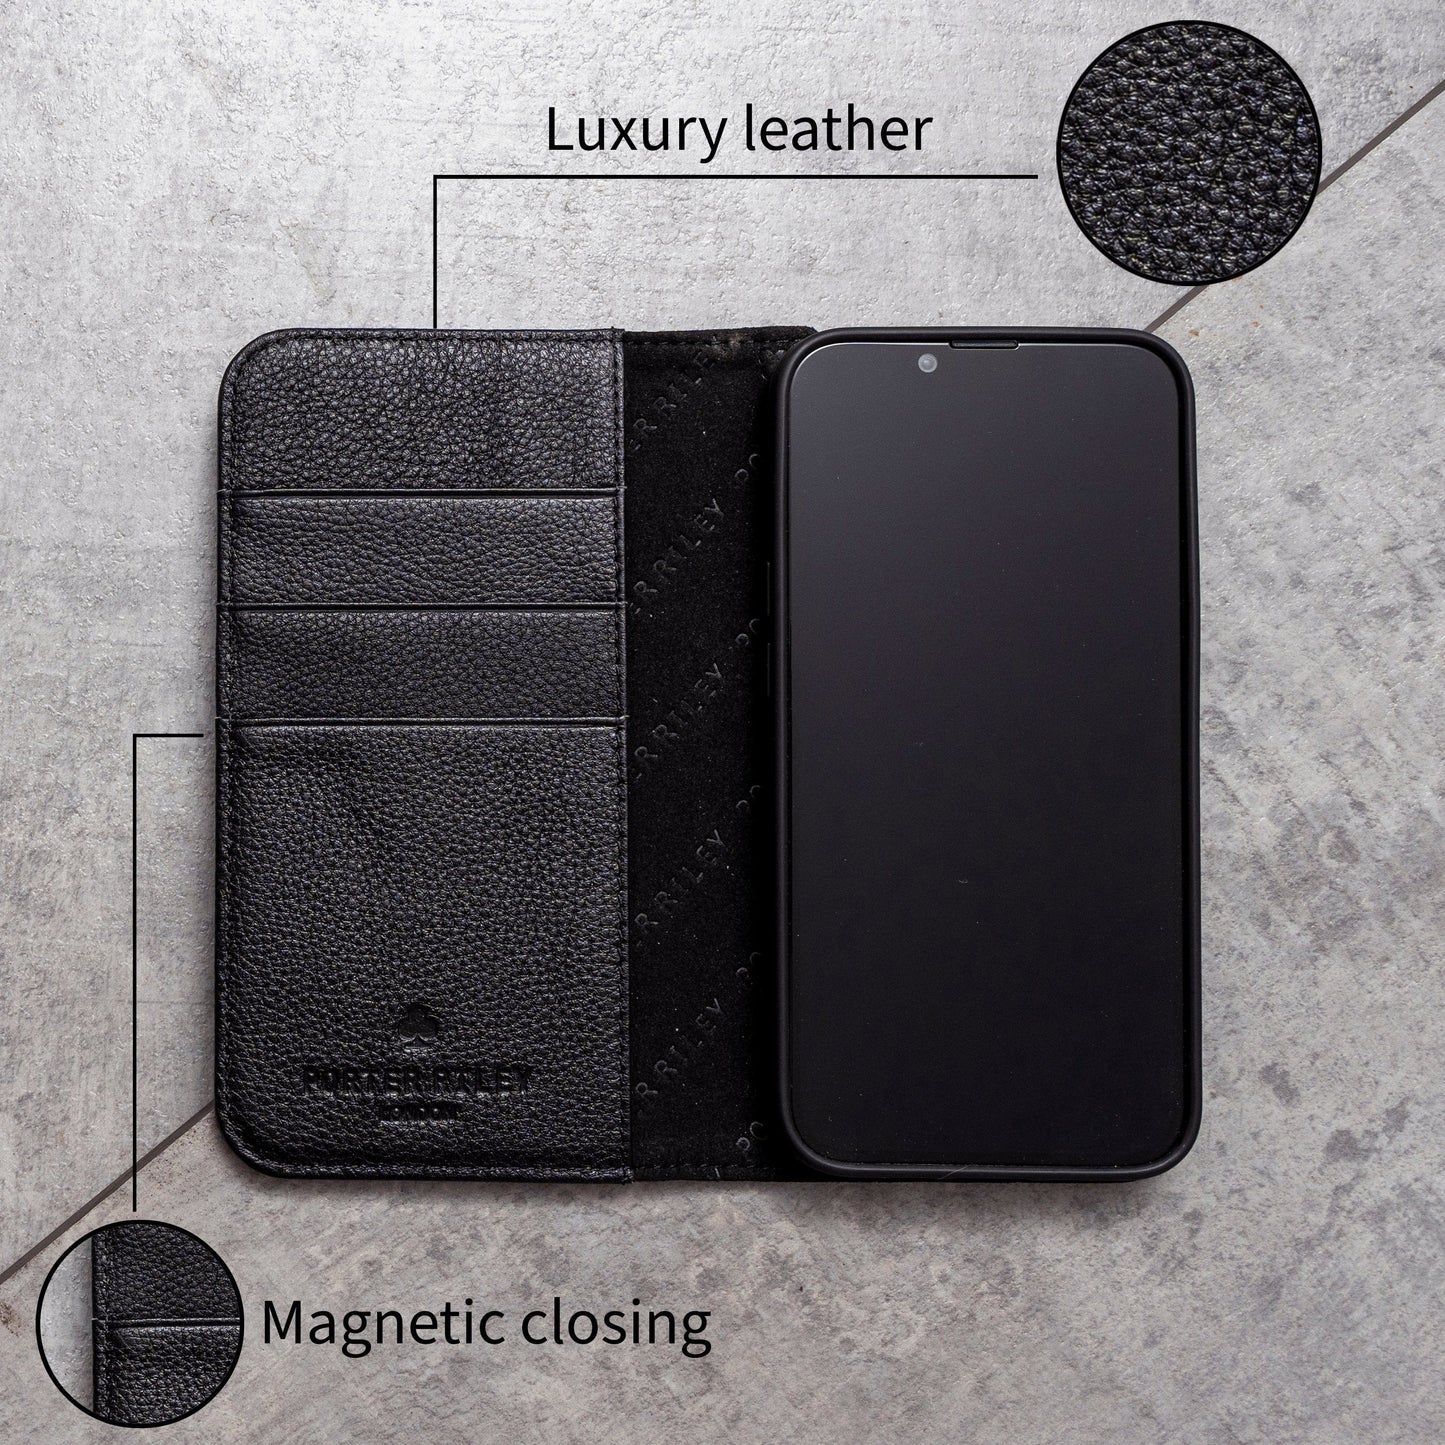 Huawei P20 Pro Leather Case. Premium Slim Genuine Leather Stand Case/Cover/Wallet (Pure Black)